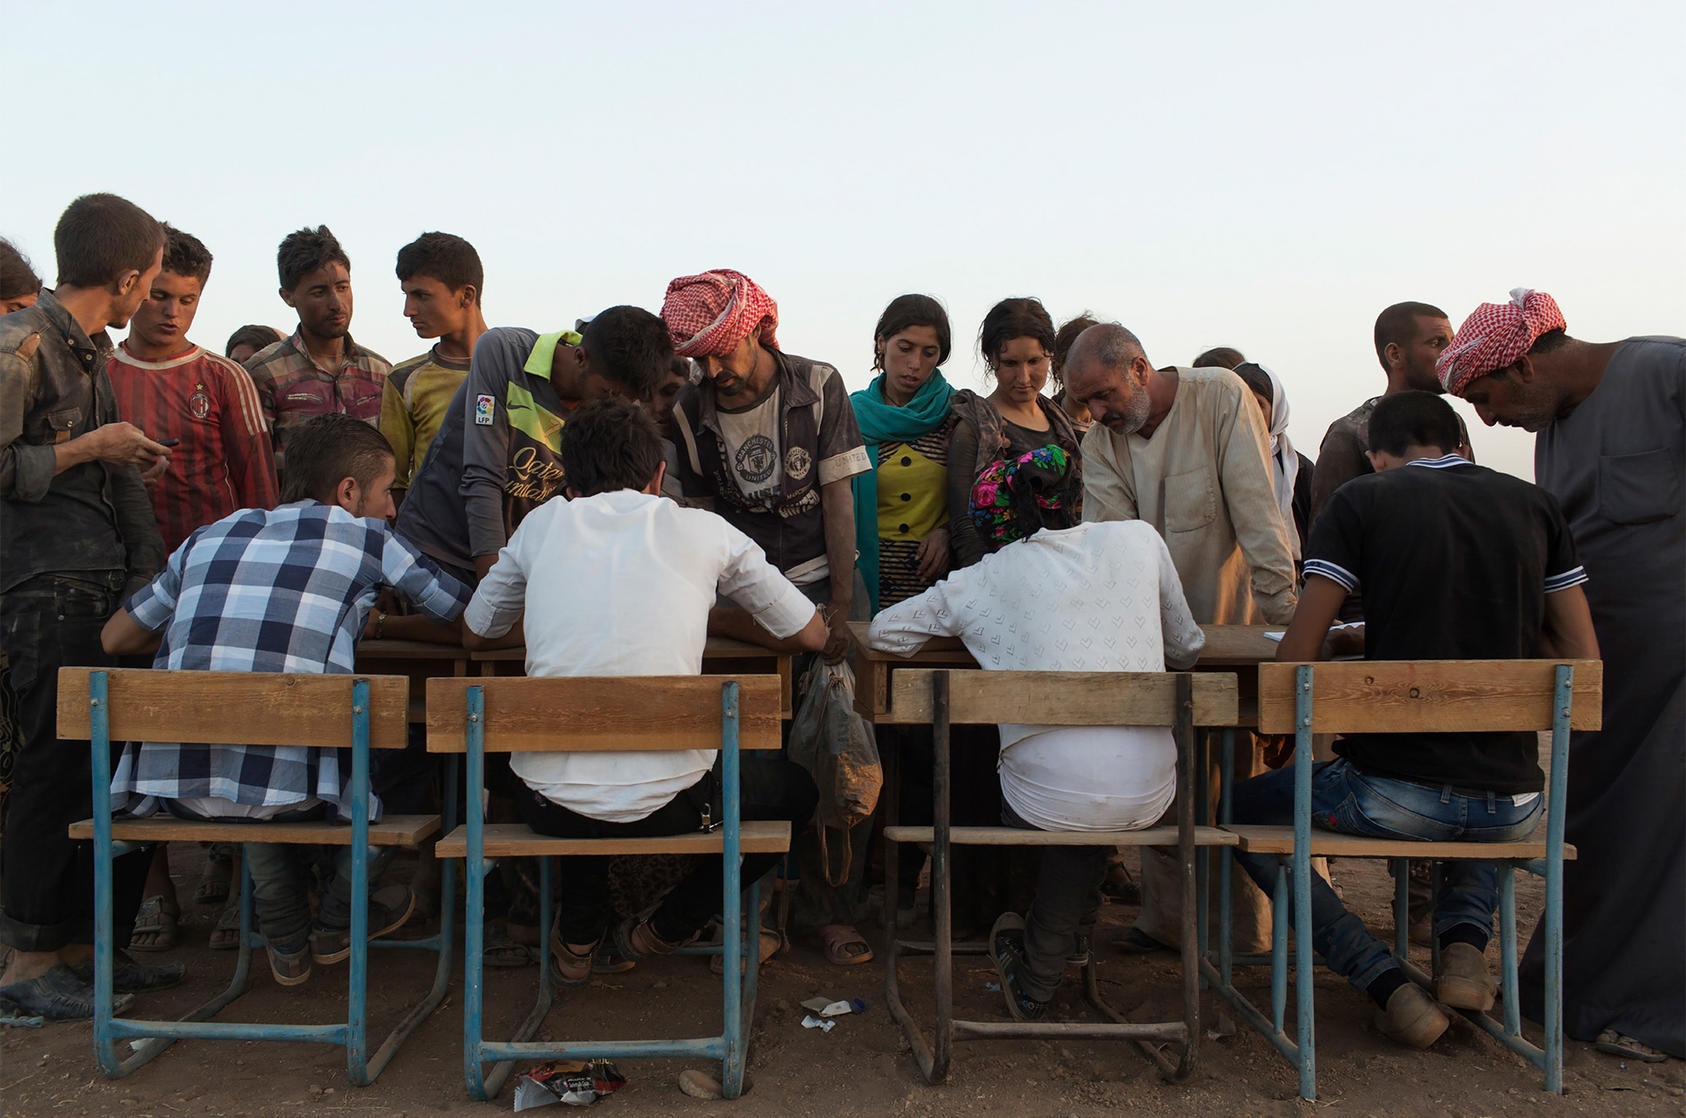 Iraqi Yazidis who have come from the Sinjar mountains register upon arrival at a refugee camp in Derik, Syria, Aug. 10, 2014. (Adam Ferguson/The New York Times)